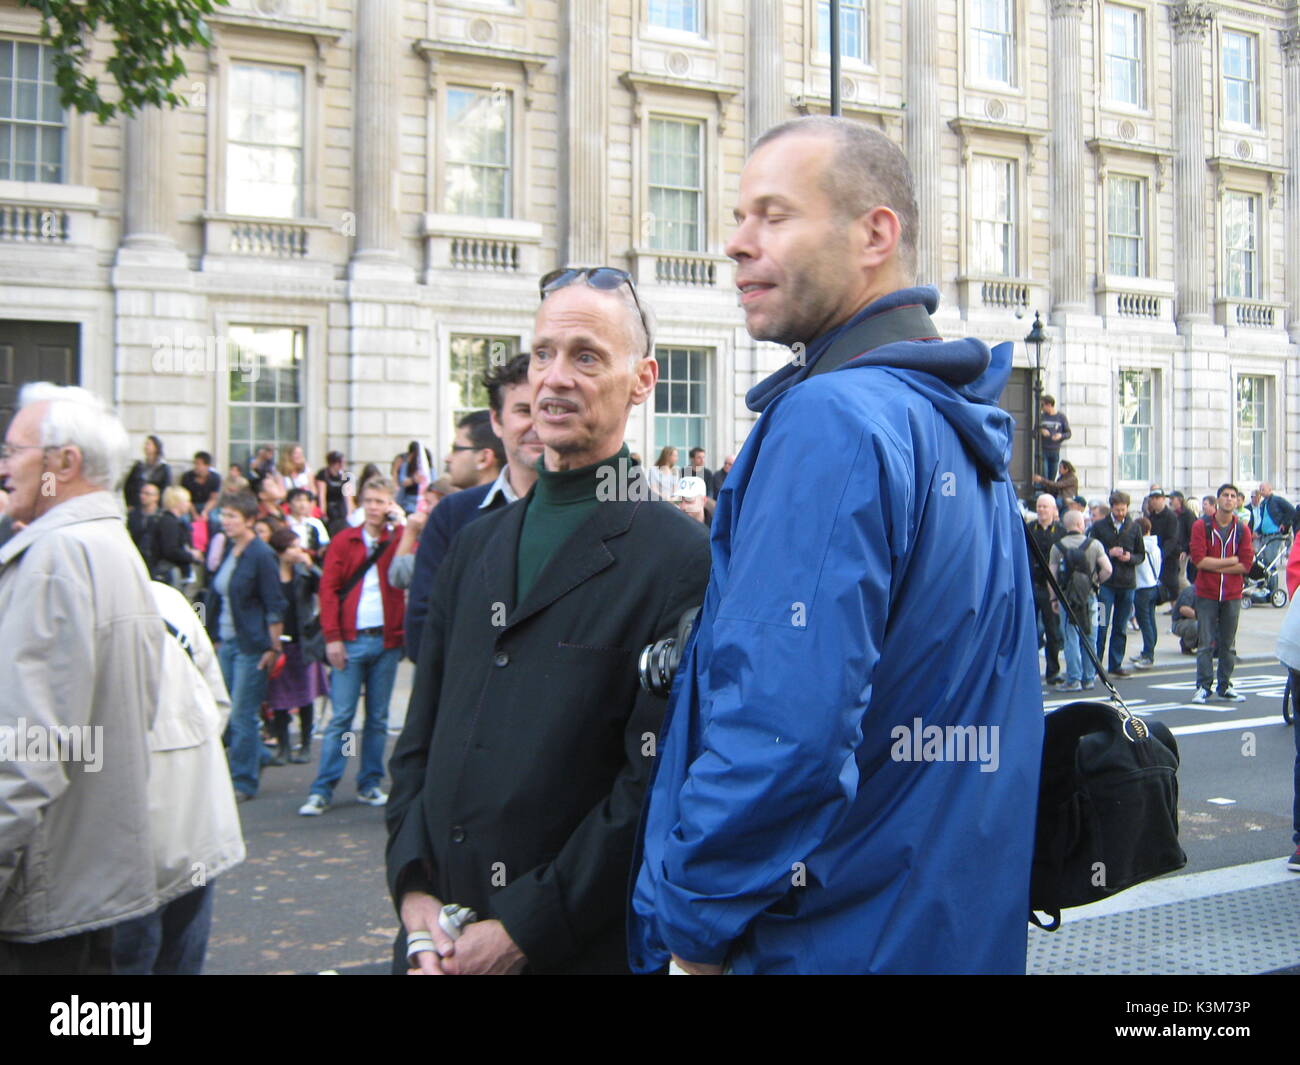 Film Director JOHN WATERS on the Gay Pride March, in London 2010 Stock Photo